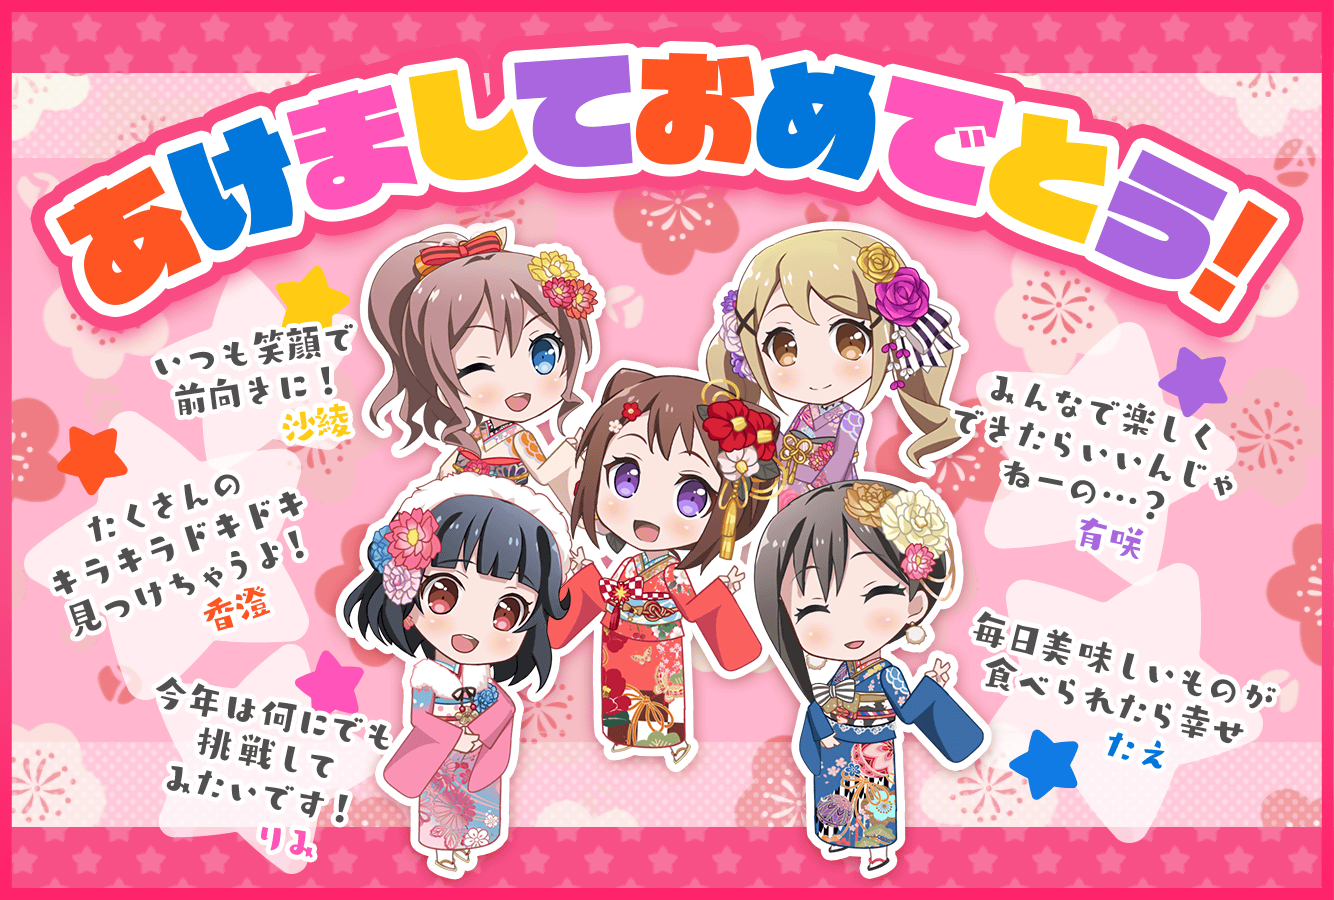 New Years 2019 Card - Poppin'Party